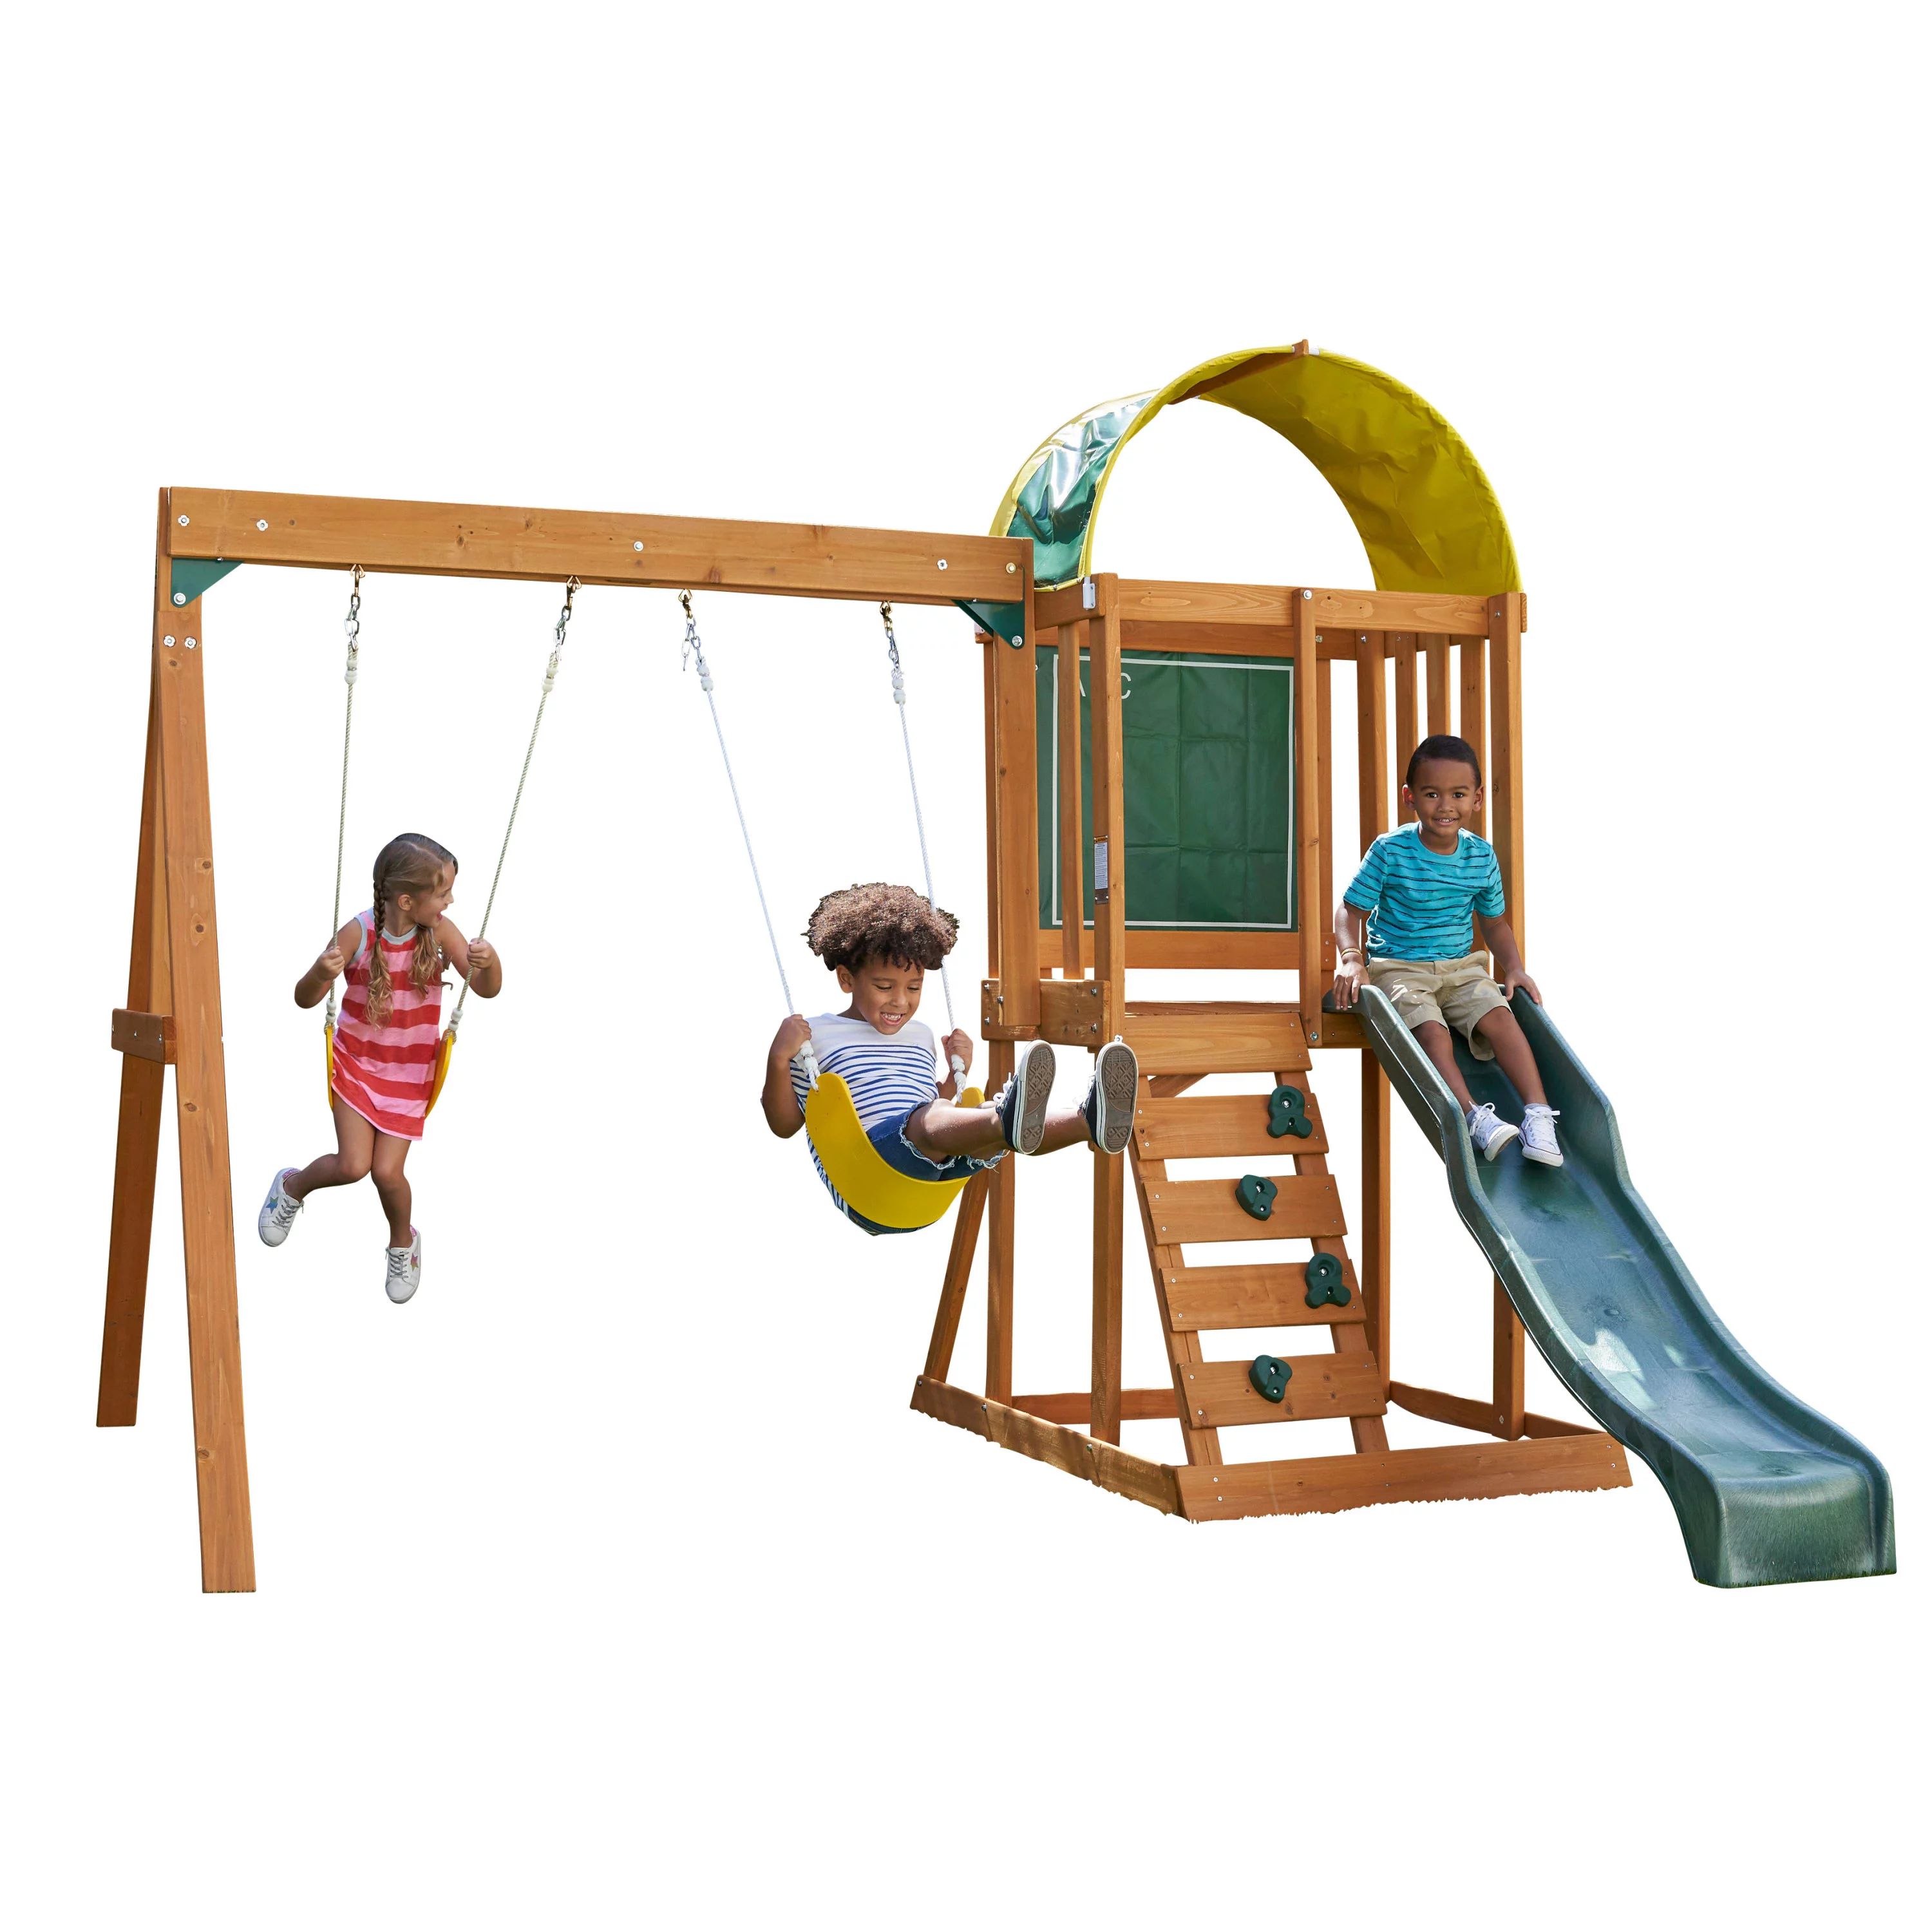 KidKraft Ainsley Wooden Outdoor Swing Set with Slide, Chalk Wall, Canopy and Rock Wall | Walmart (US)